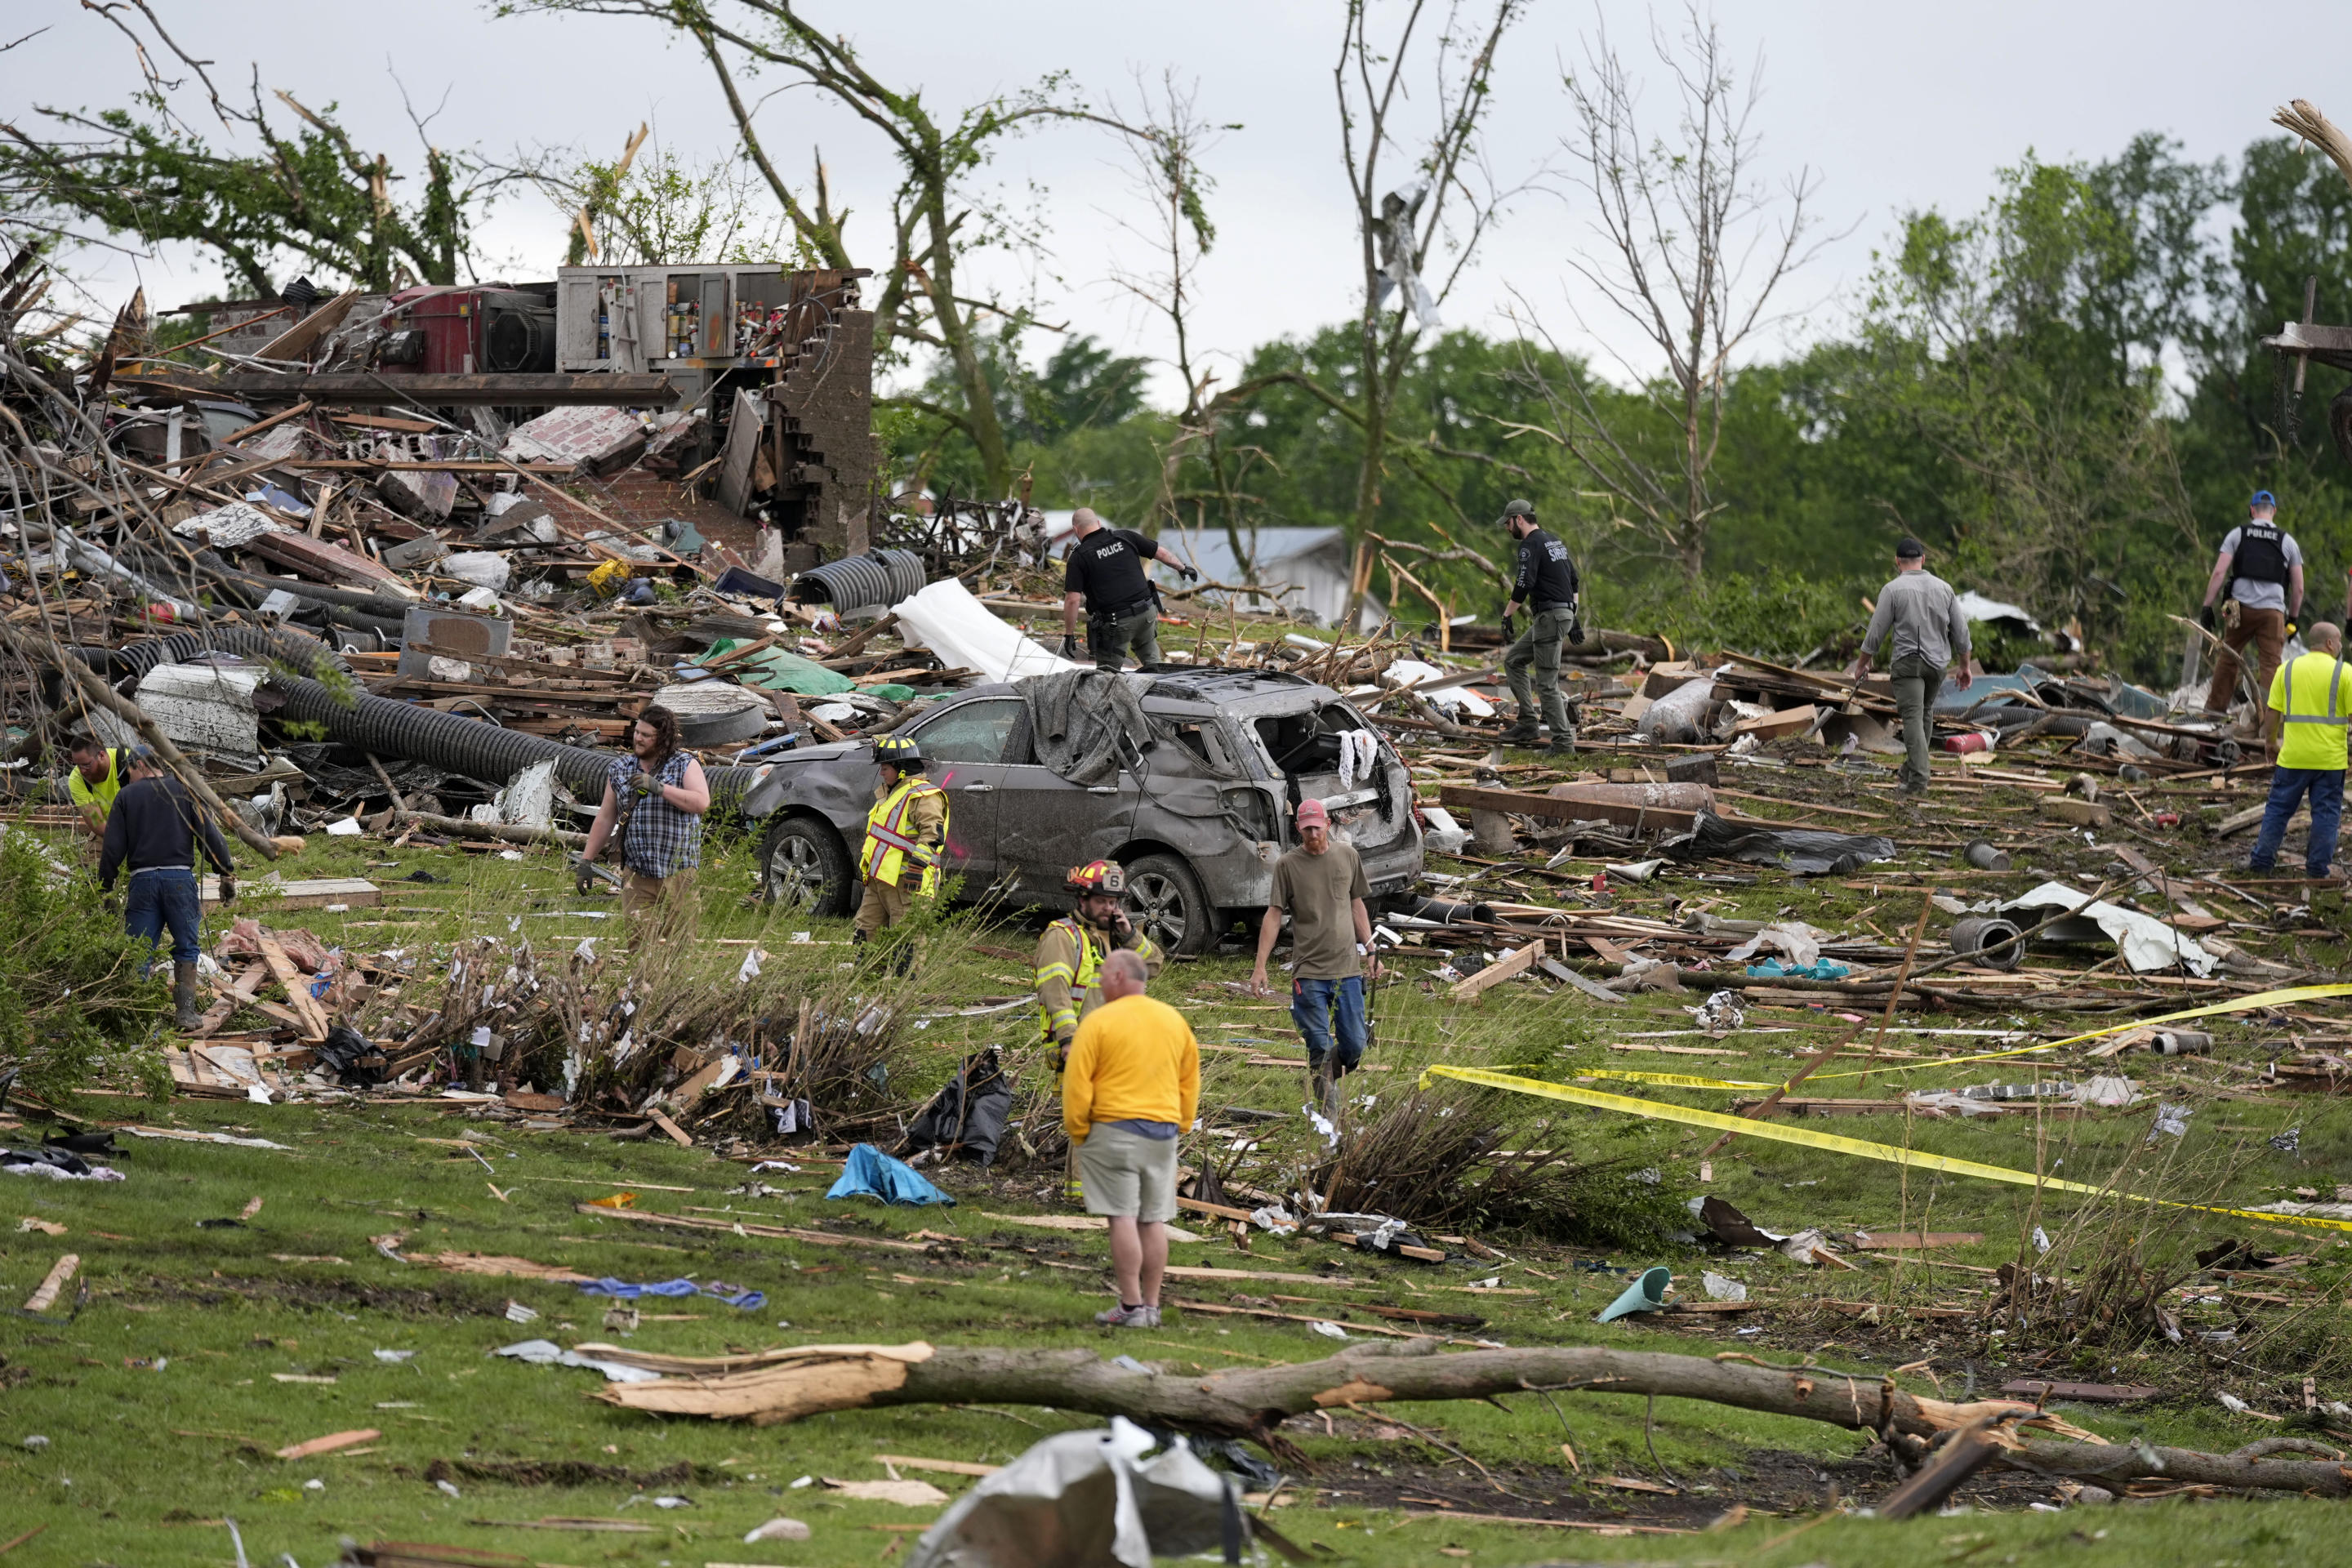 Workers search through the remains of tornado-damaged homes on Tuesday in Greenfield, Iowa.